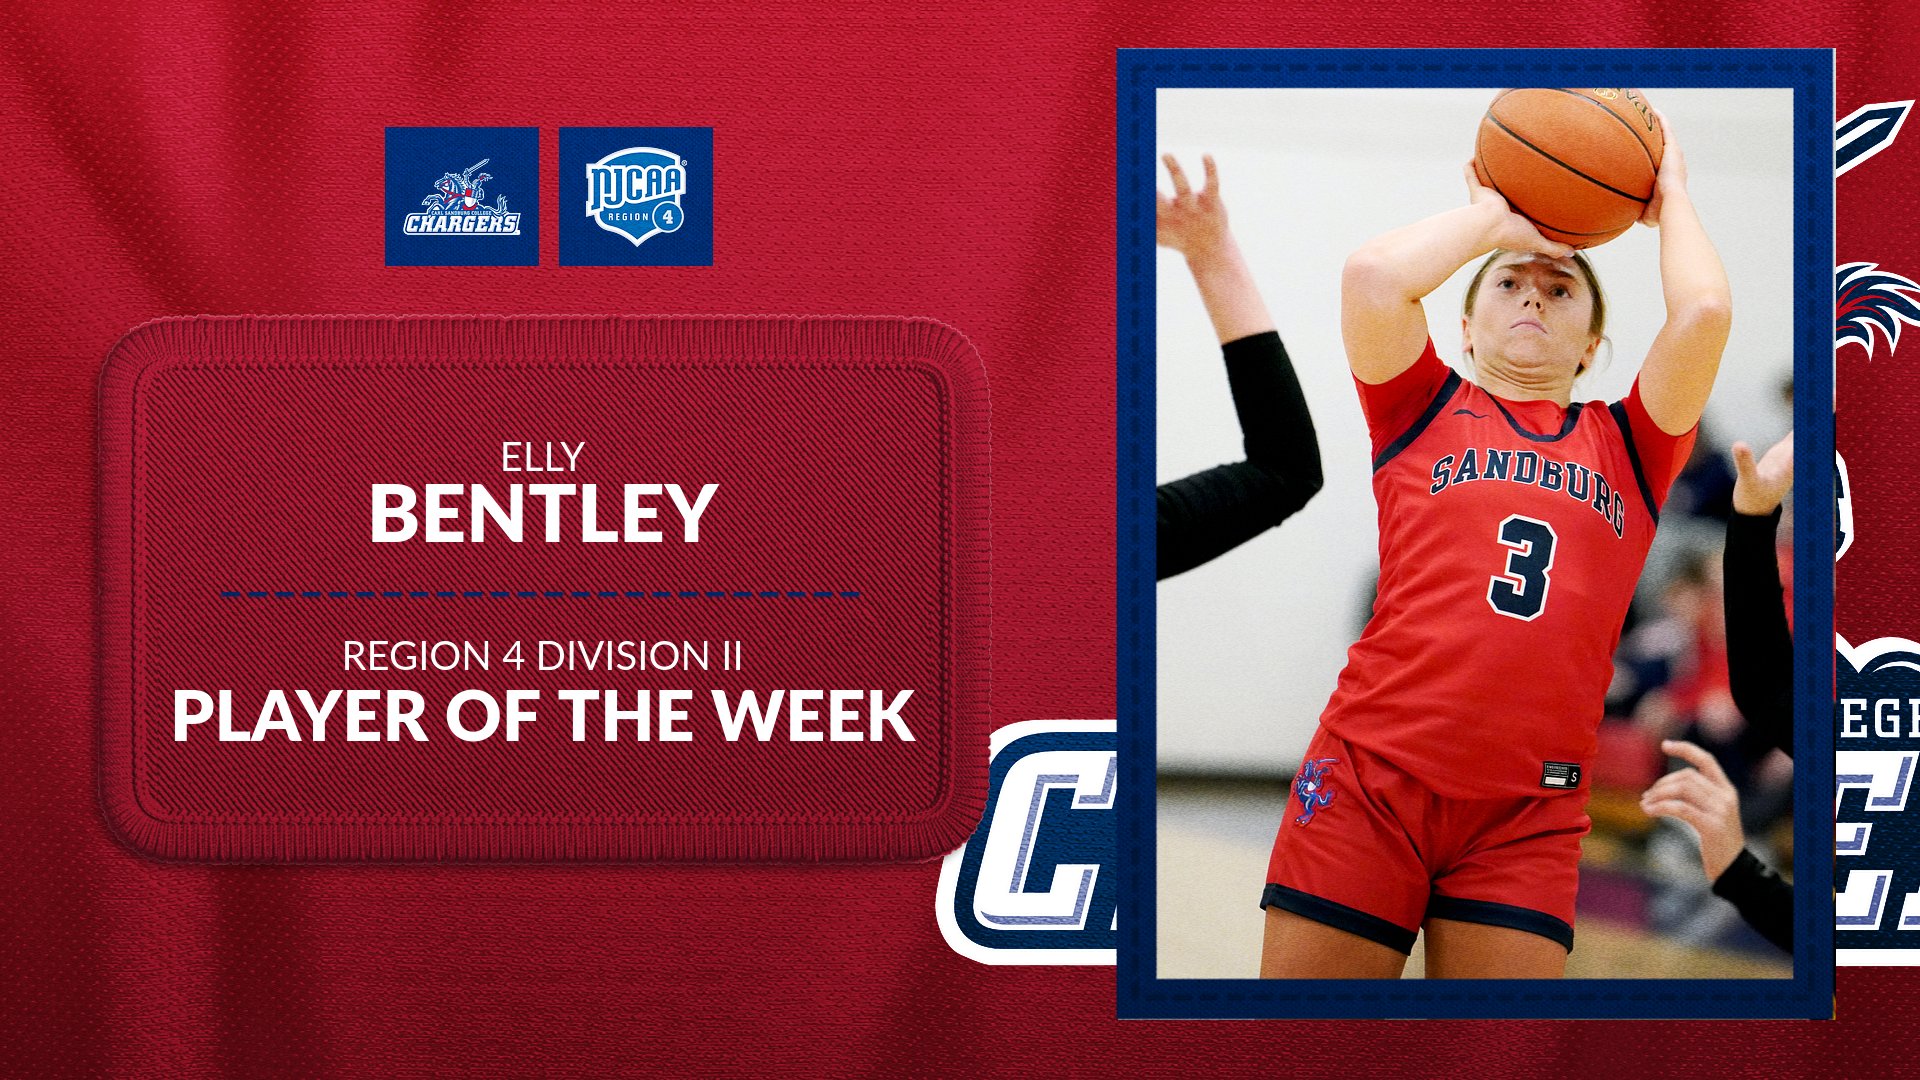 Bentley Earns Region 4 Player of the Week for 2nd Time This Season